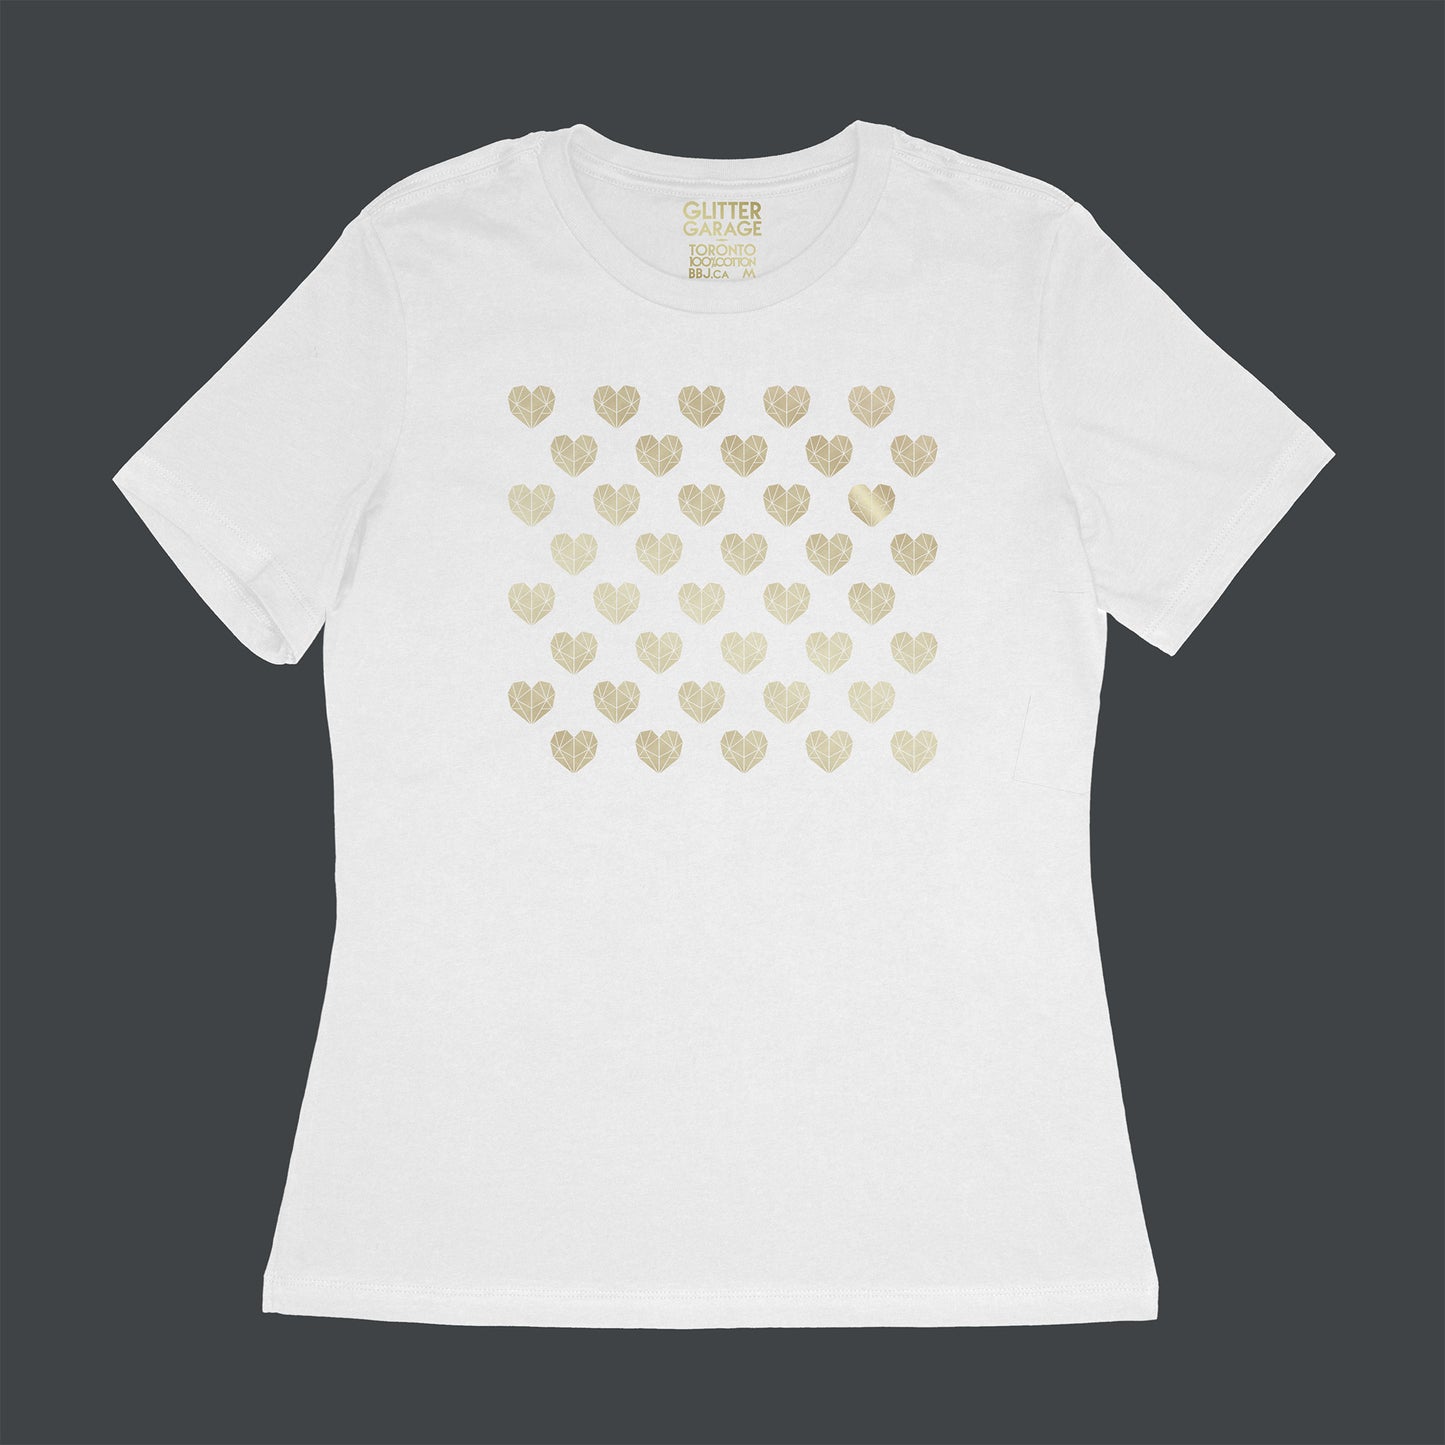 Many Hearts customizable tee - white women's relaxed fit tee with 40 hearts - gold matte, metallic by BBJ / Glitter Garage